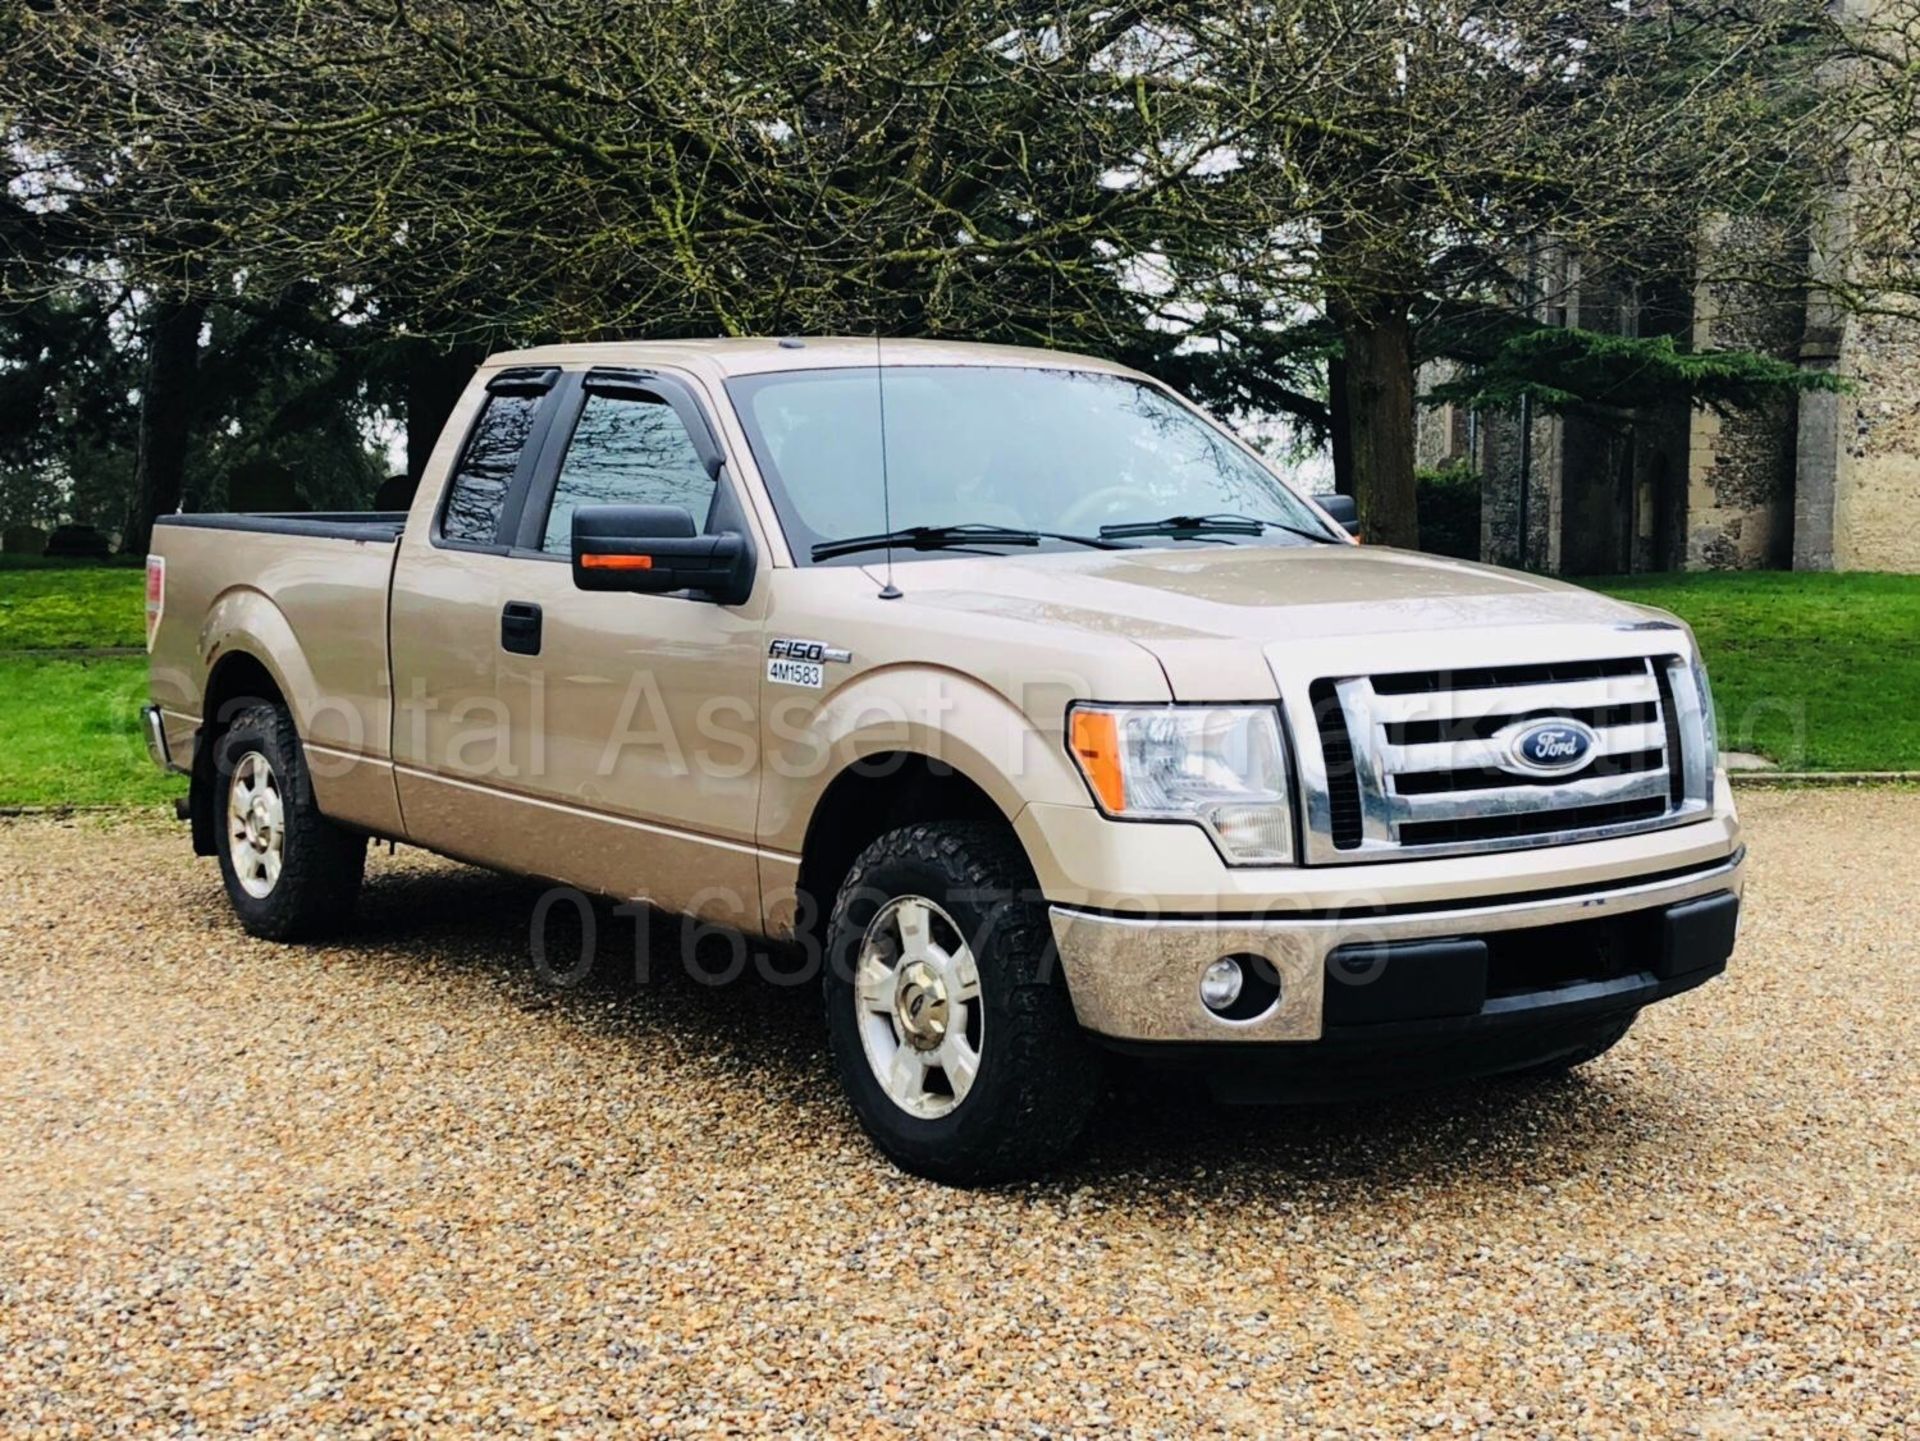 FORD F-150 'XLT EDITION' KING CAB (2012 MODEL) '5.0 V8 - COLUM GEARBOX' **MASSIVE SPEC**